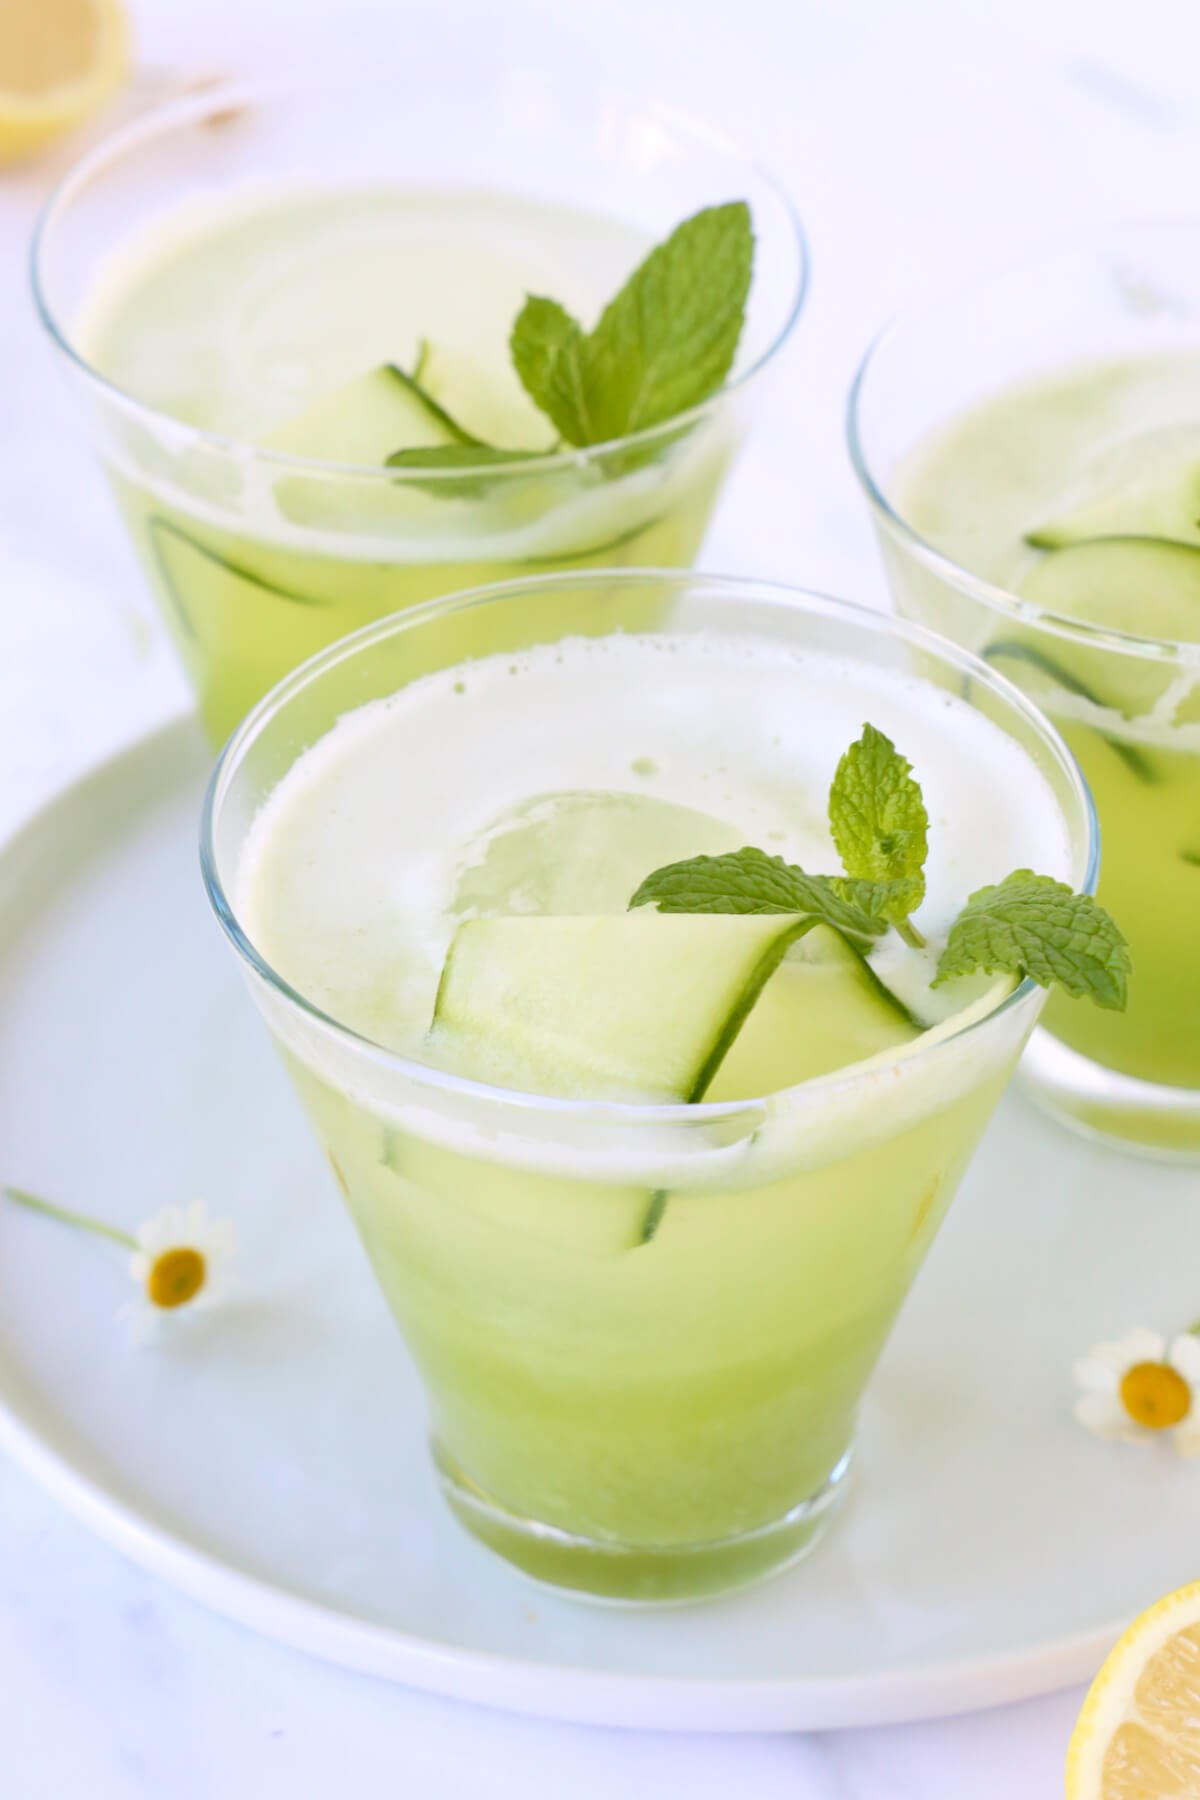 Three glasses filled with green liquid, cucumber and fresh mint.  